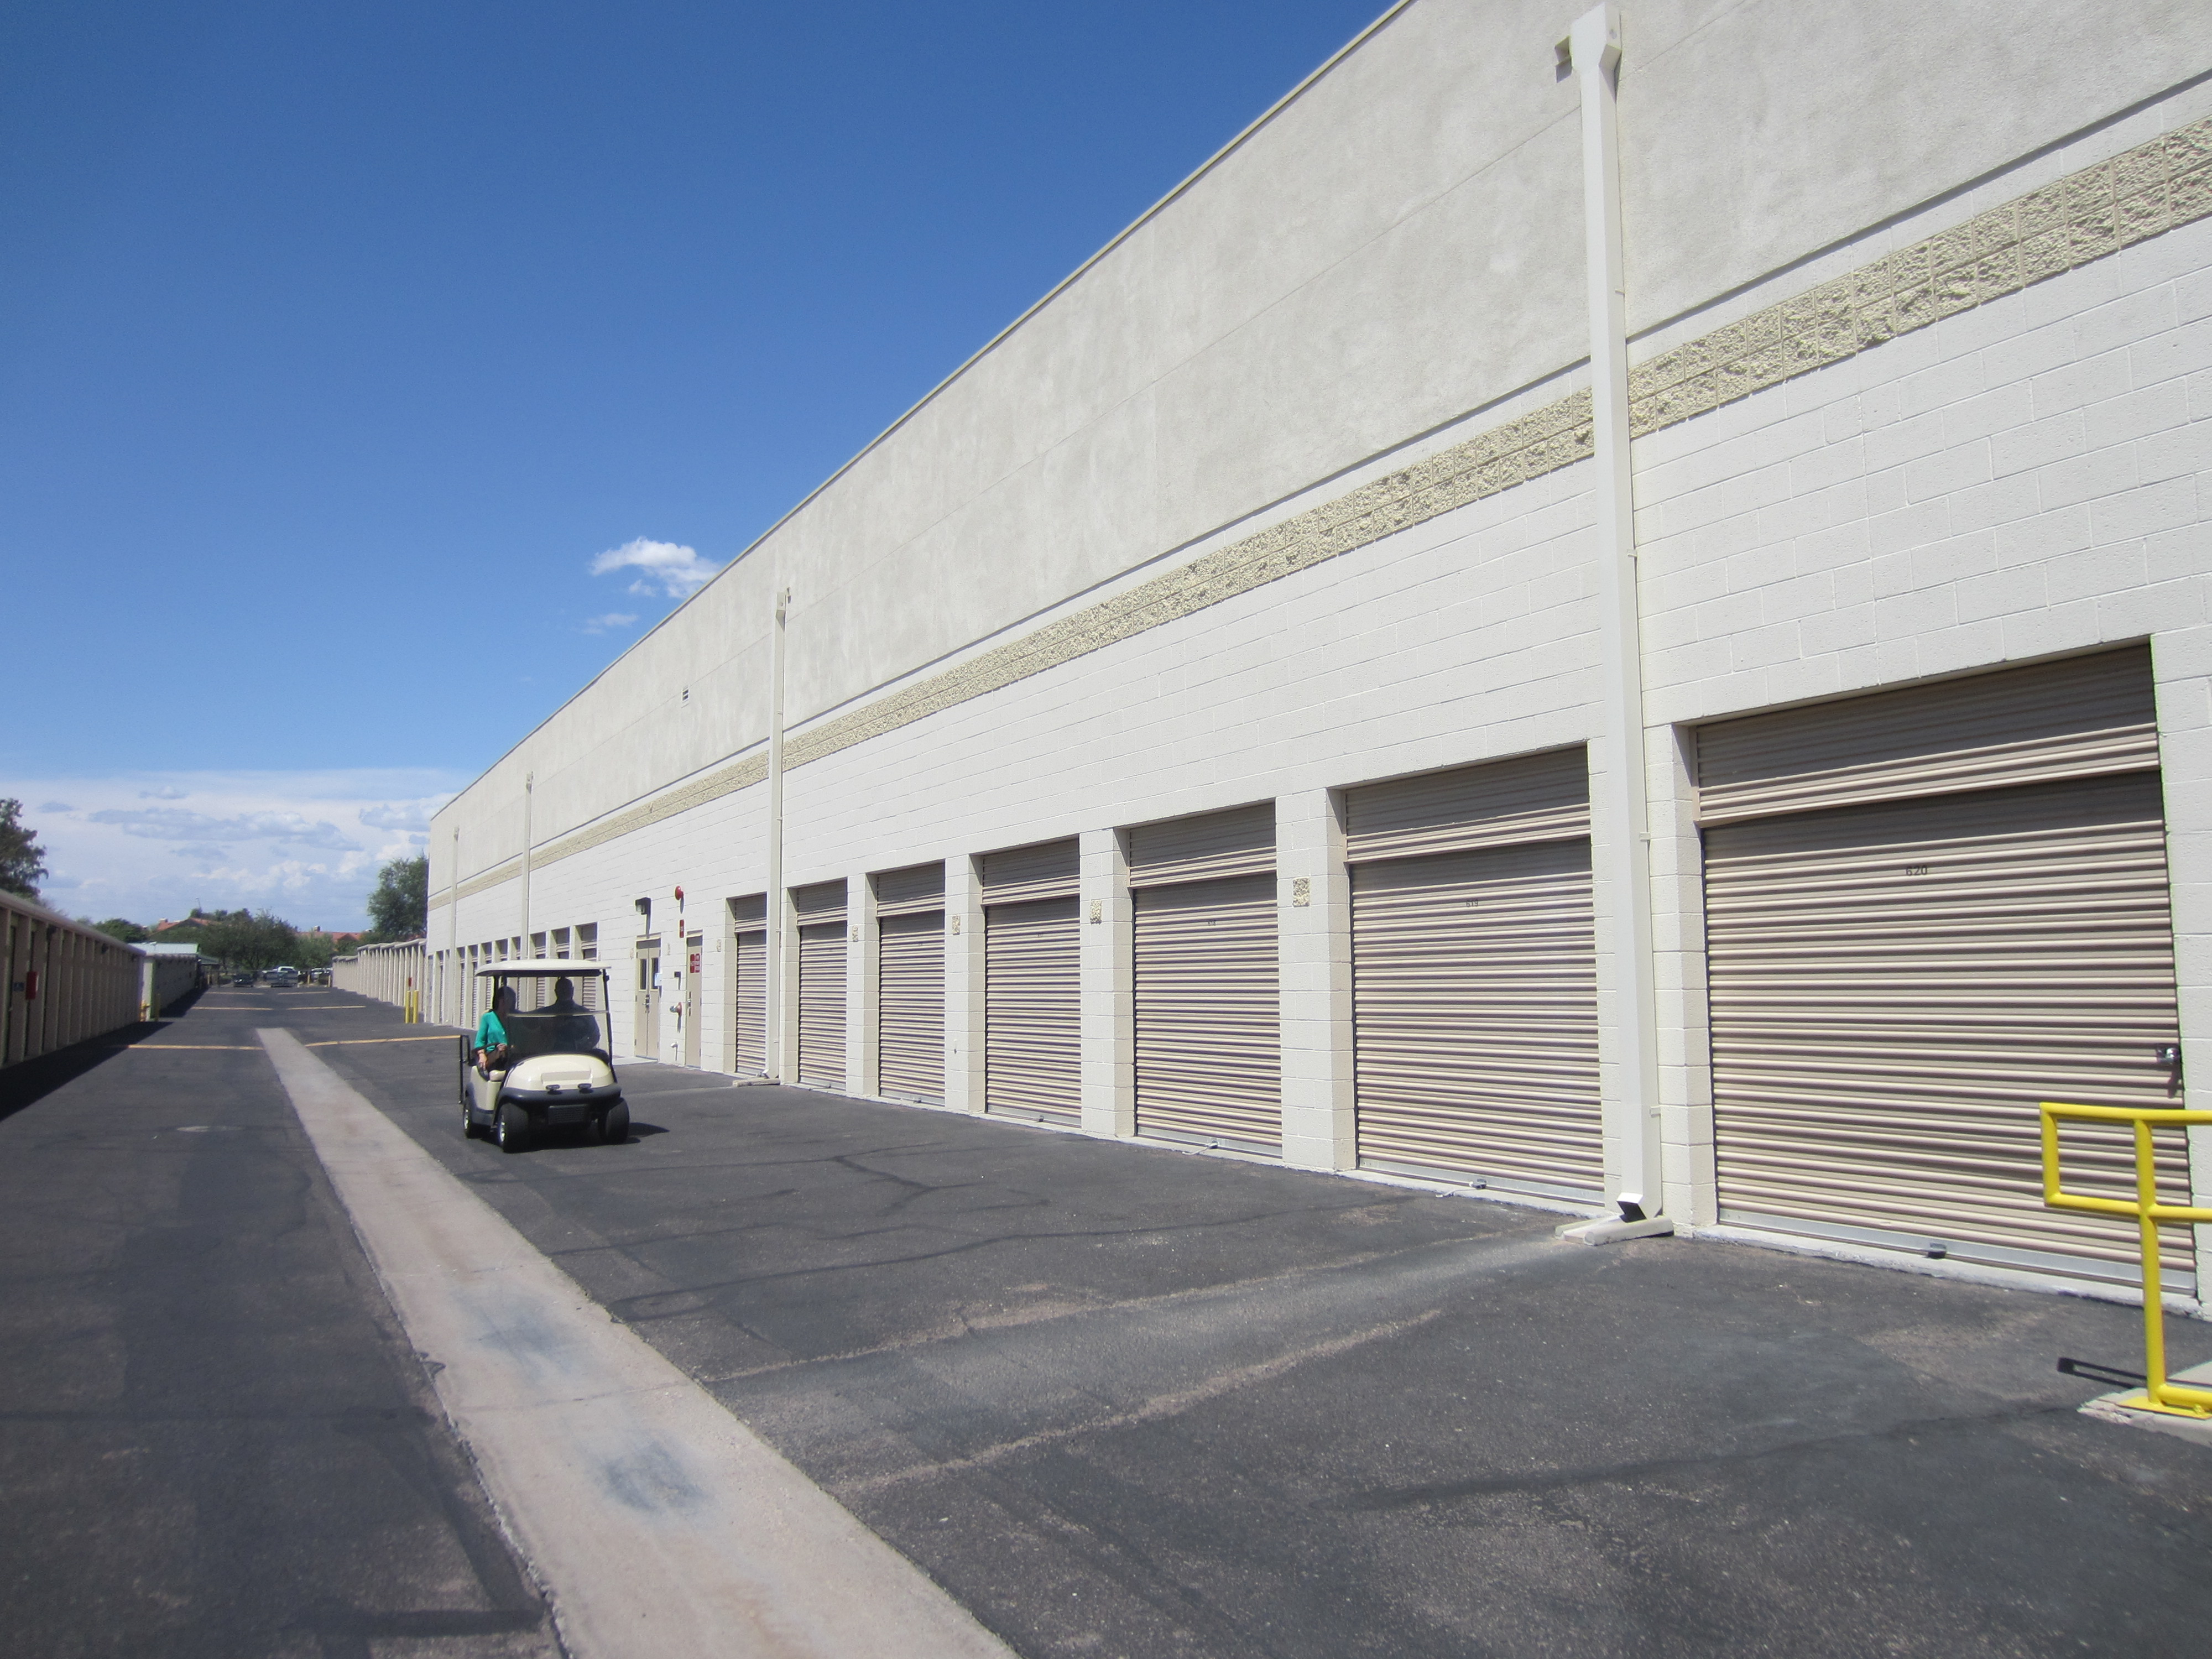 Storage West Announced it Recently Completed a Major Remodeling and